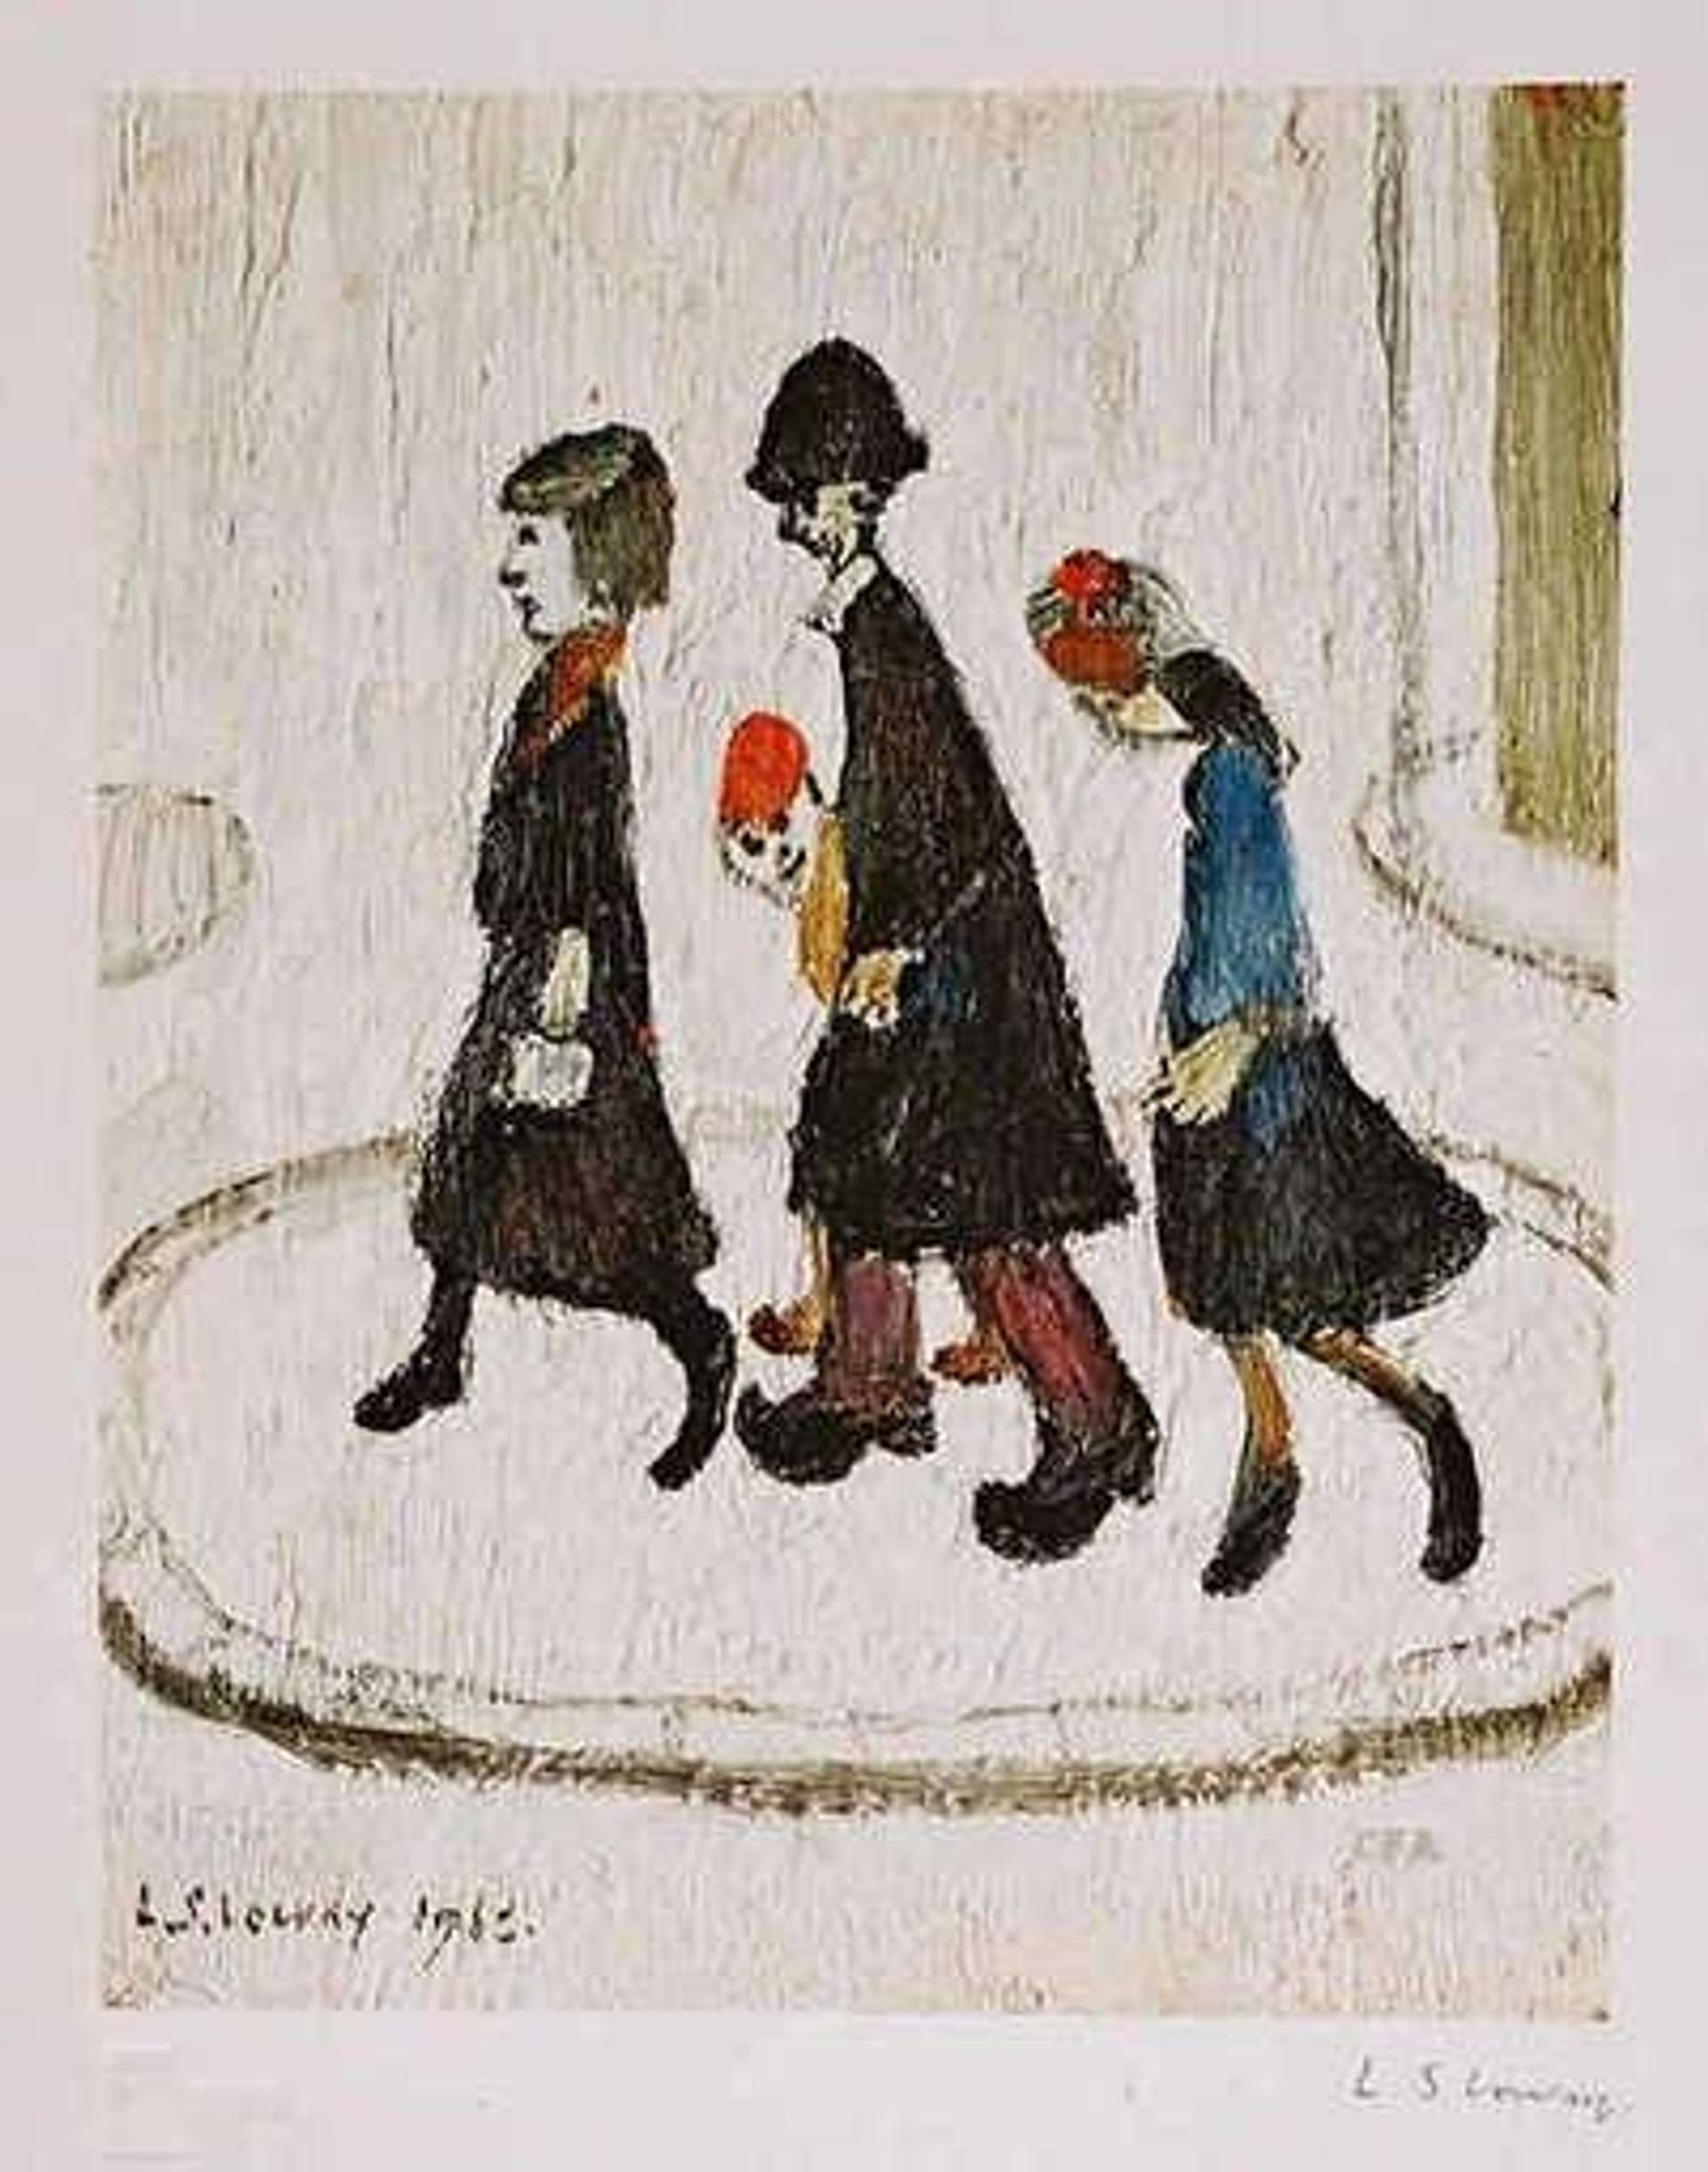 The Family by L S Lowry